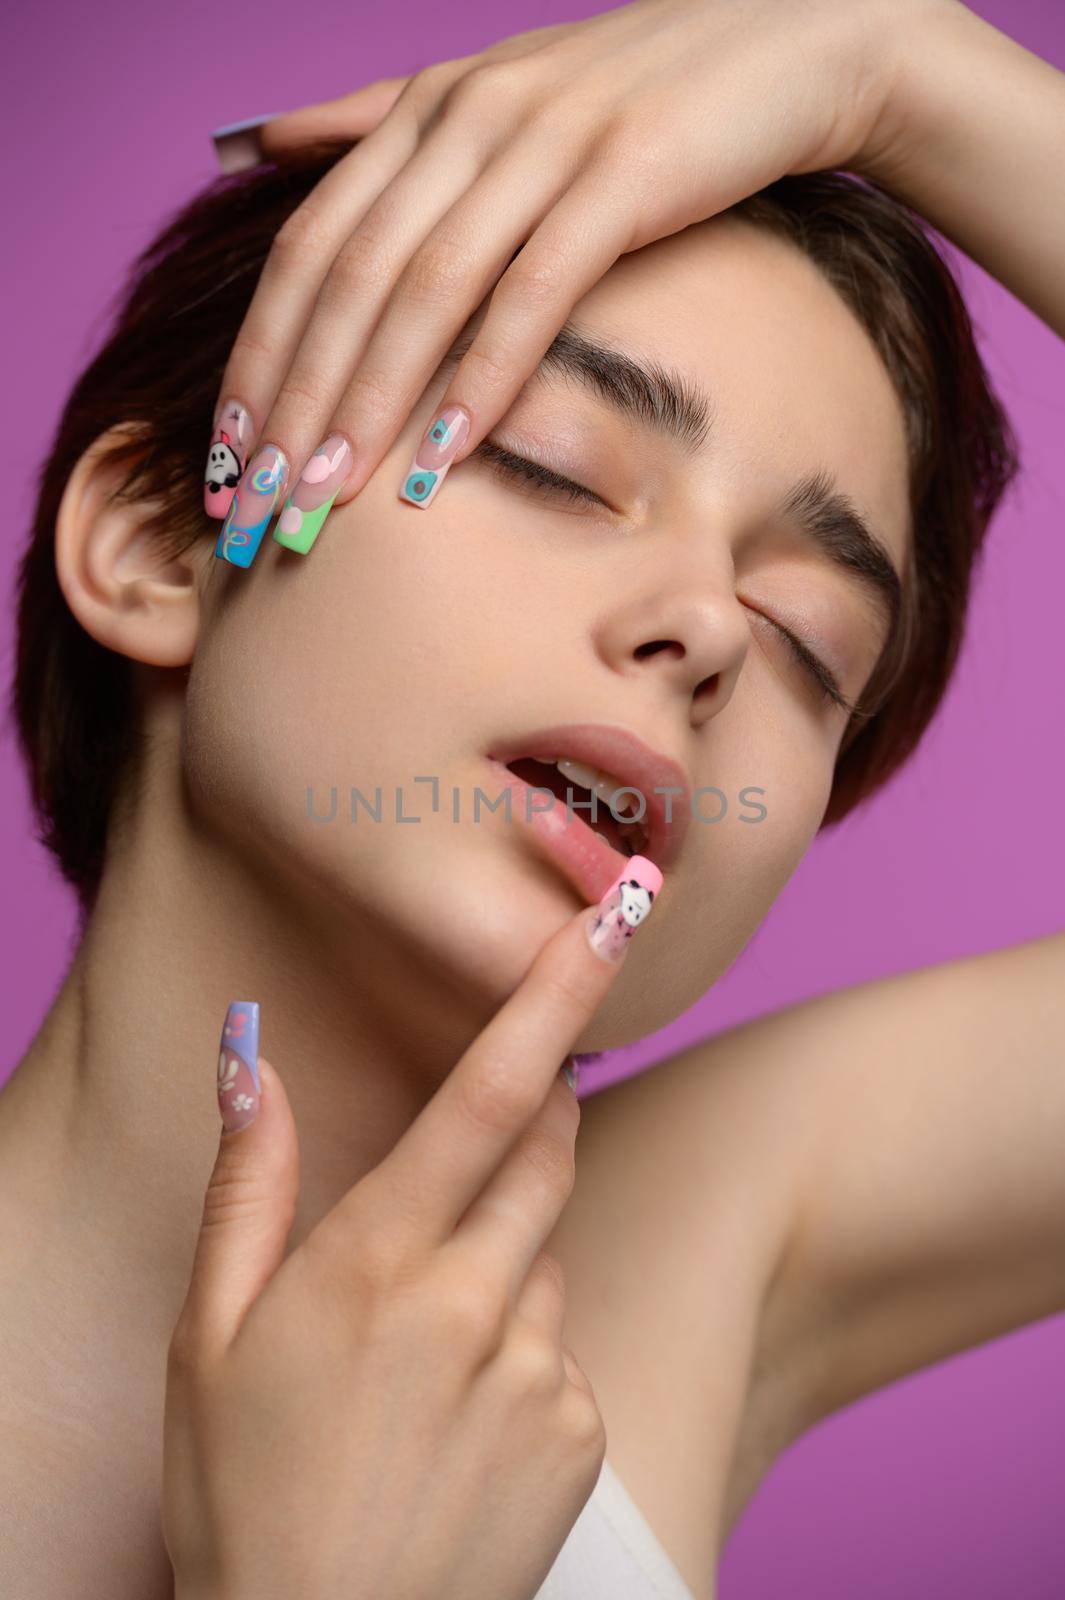 Affectionate pretty girl with short haircut and extravagant nail art by starush